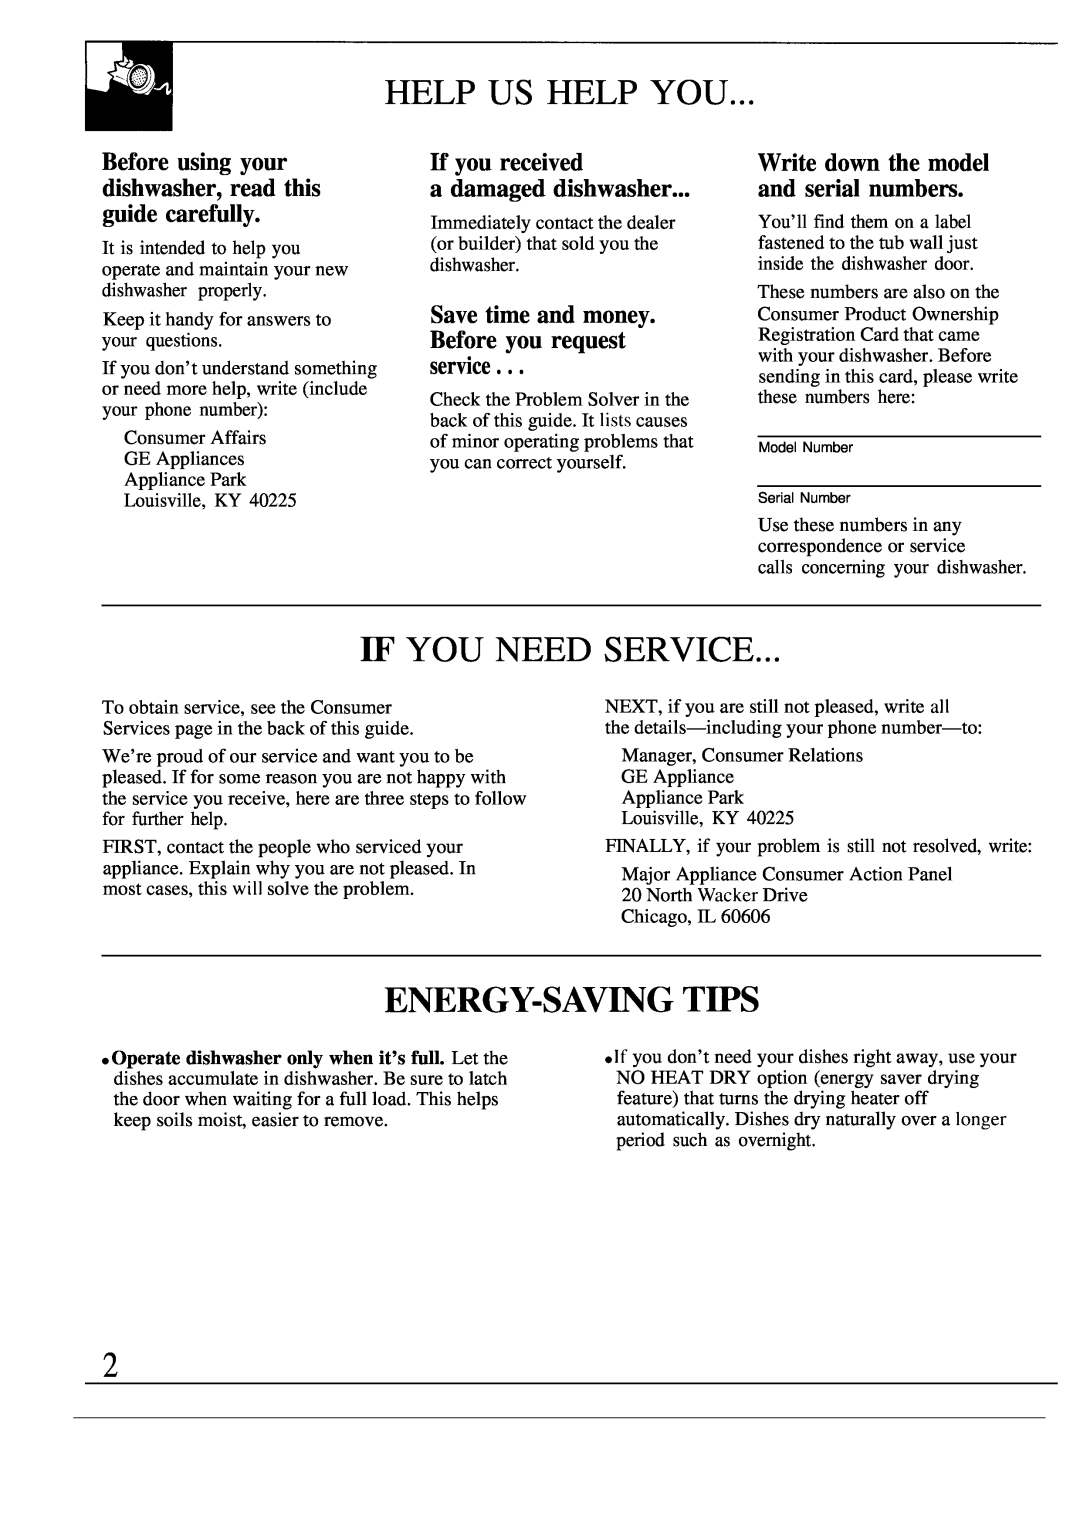 GE GSD400T Help Us Help You, W You Need Service, Energy-Sav~G T~S, Before using your dishwasher, read this guide carefully 